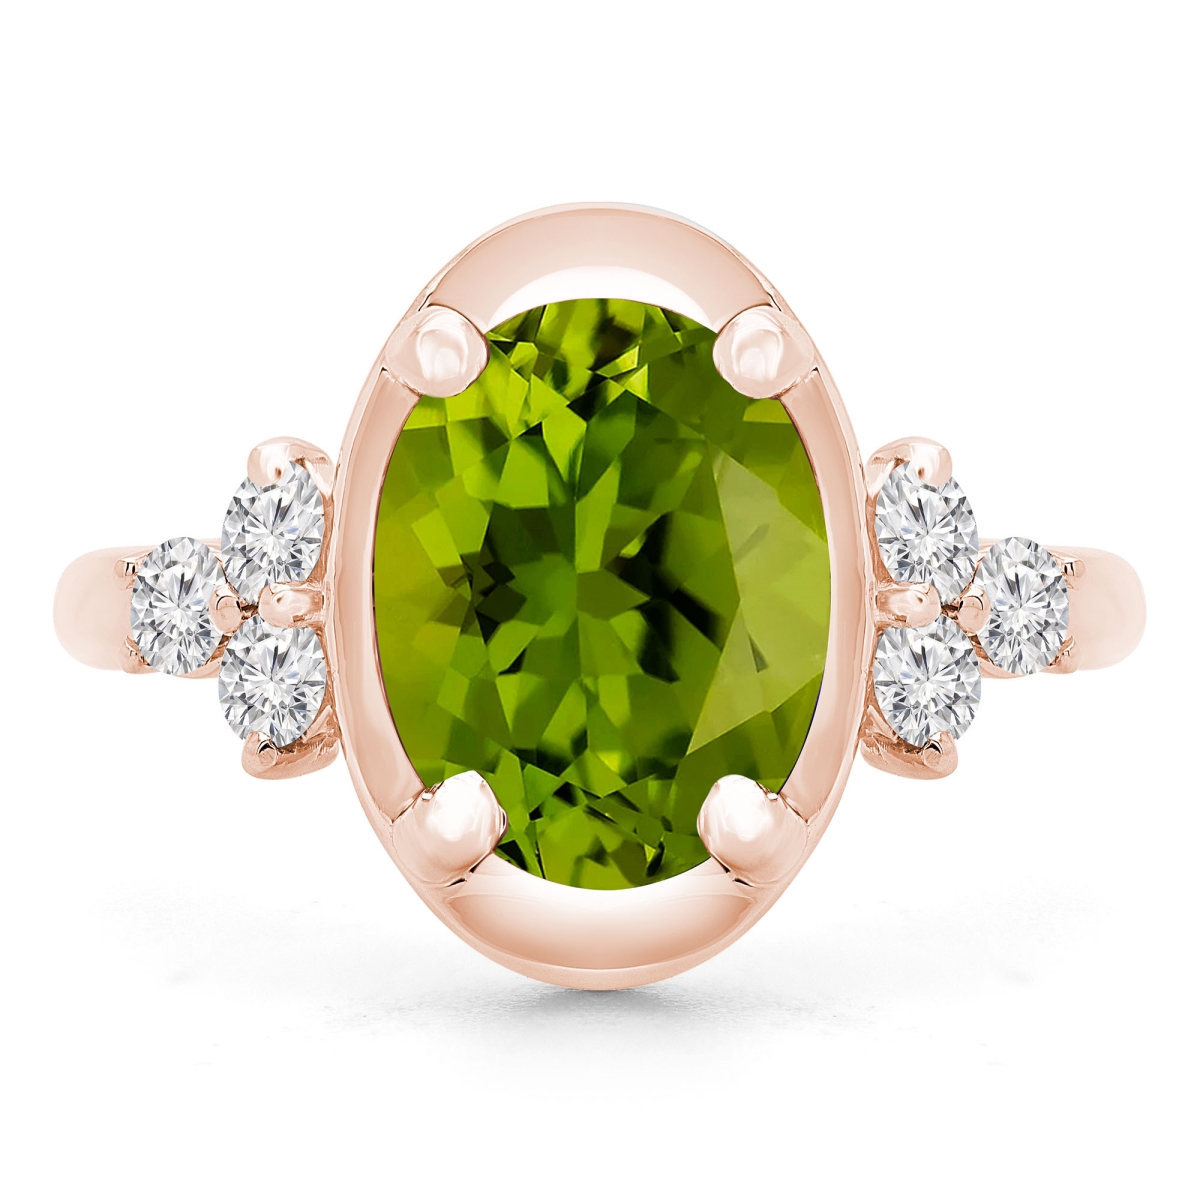 Picture of Majesty Diamonds MD190412-7.25 3.9 CTW Oval Green Peridot Cocktail Ring in 14K Rose Gold - Size 7.25